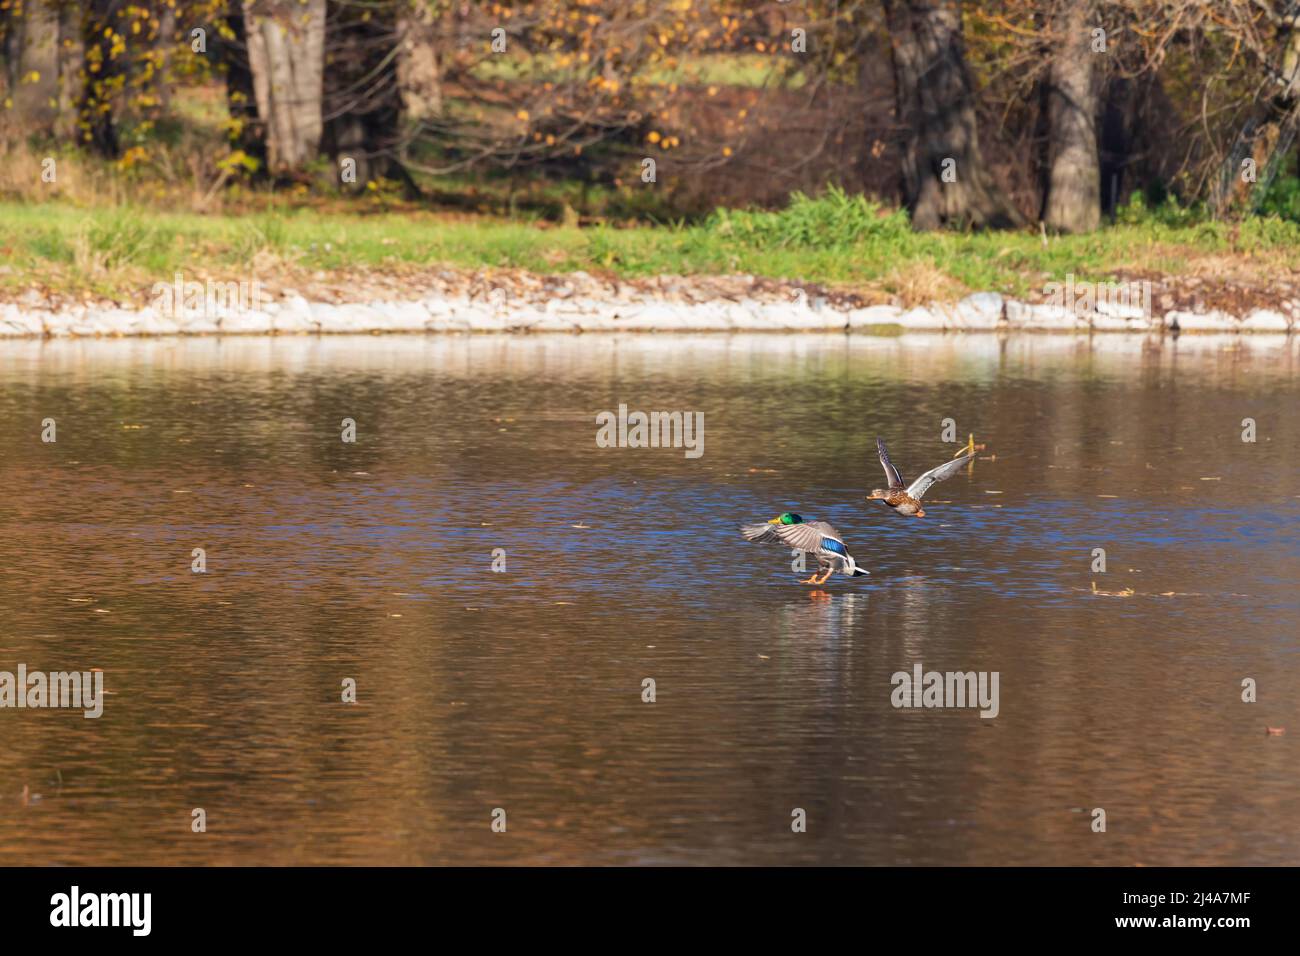 Male and female ducks swim in the water on a pond in the setting sun. Stock Photo